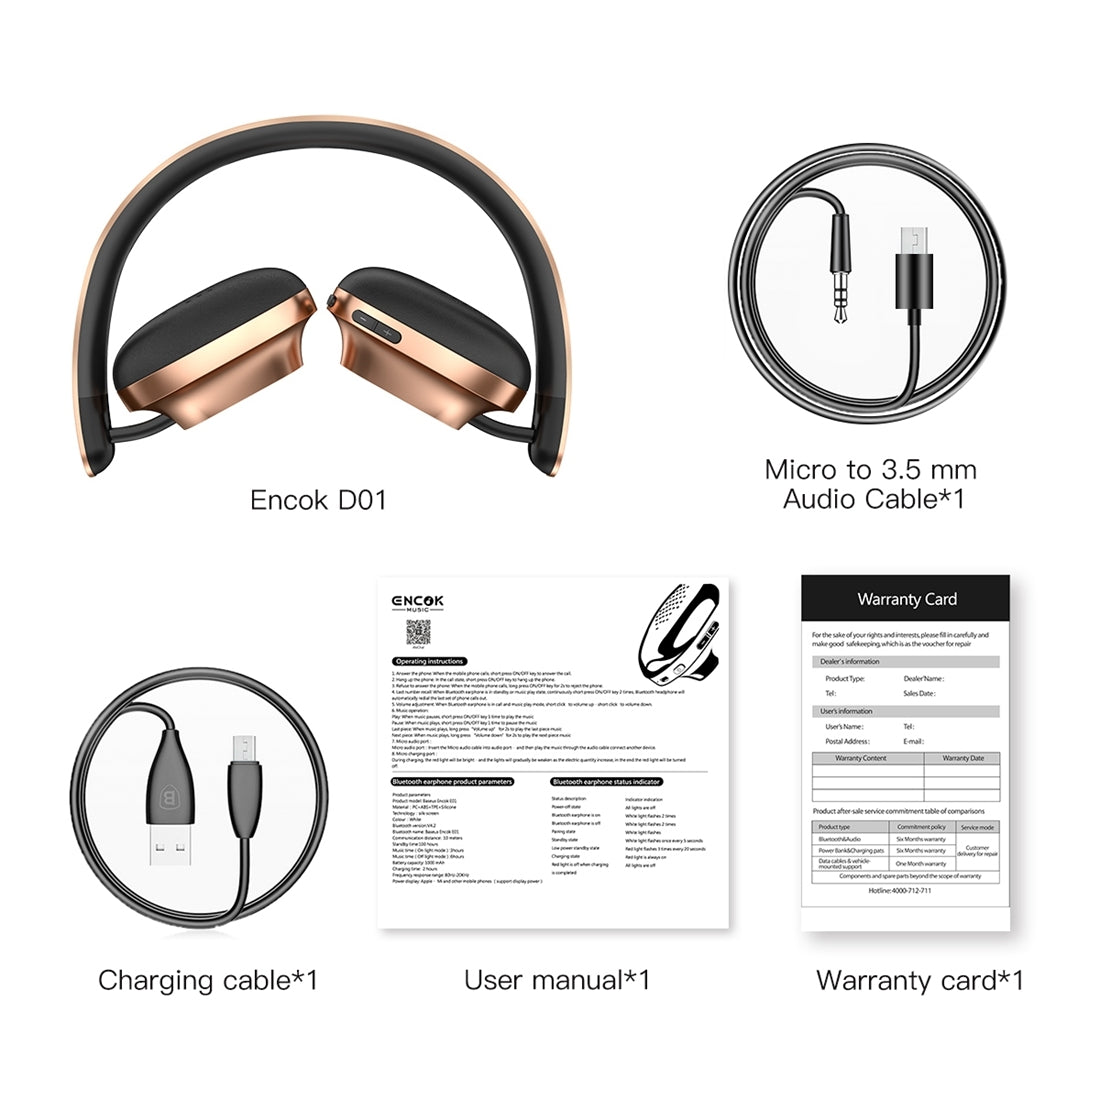 Baseus Encok D01 Headband Bluetooth / wired earphone dual mode Headphone Headset with Mic, for iPhone, iPad, iPod, Samsung, HTC, Sony, Huawei, Xiaomi and other Audio Devices(Blush Gold)